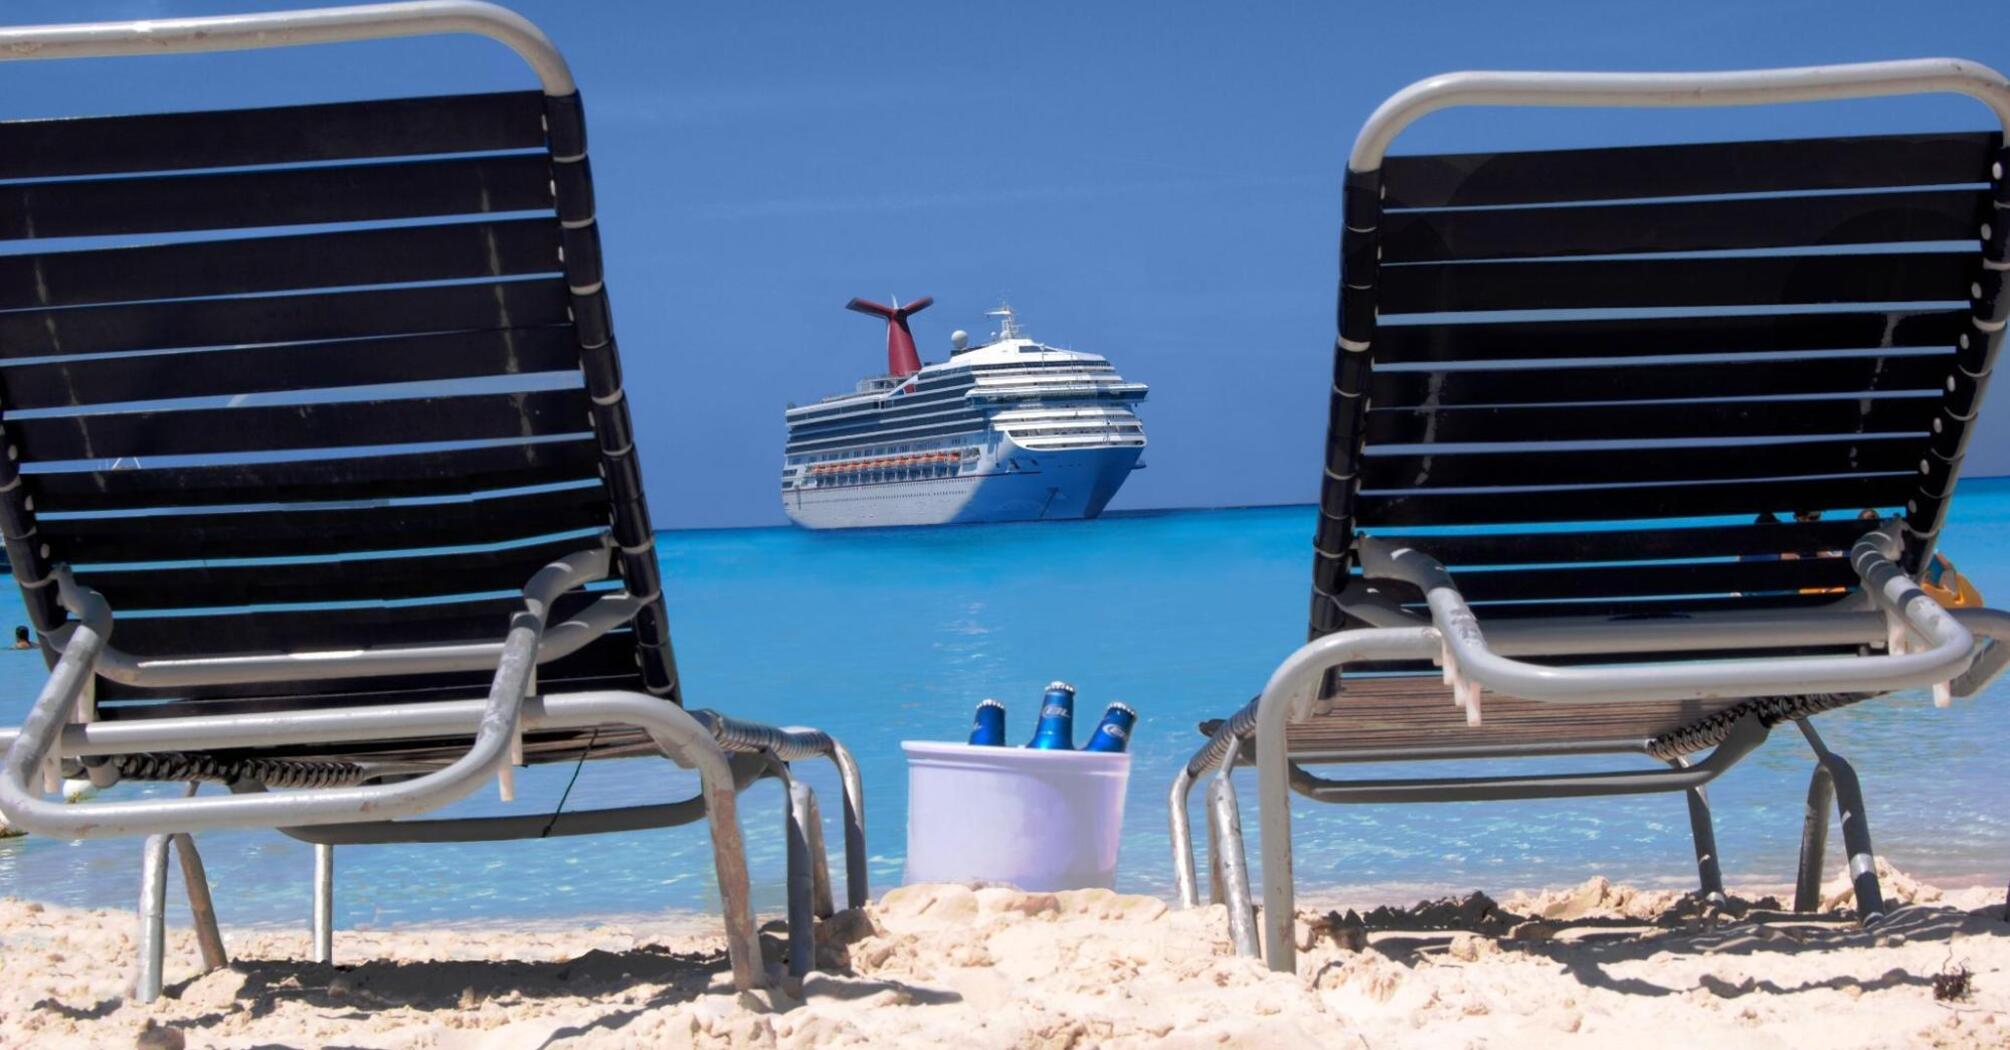 Relaxation loungers overlooking the huge cruise ship Carnival